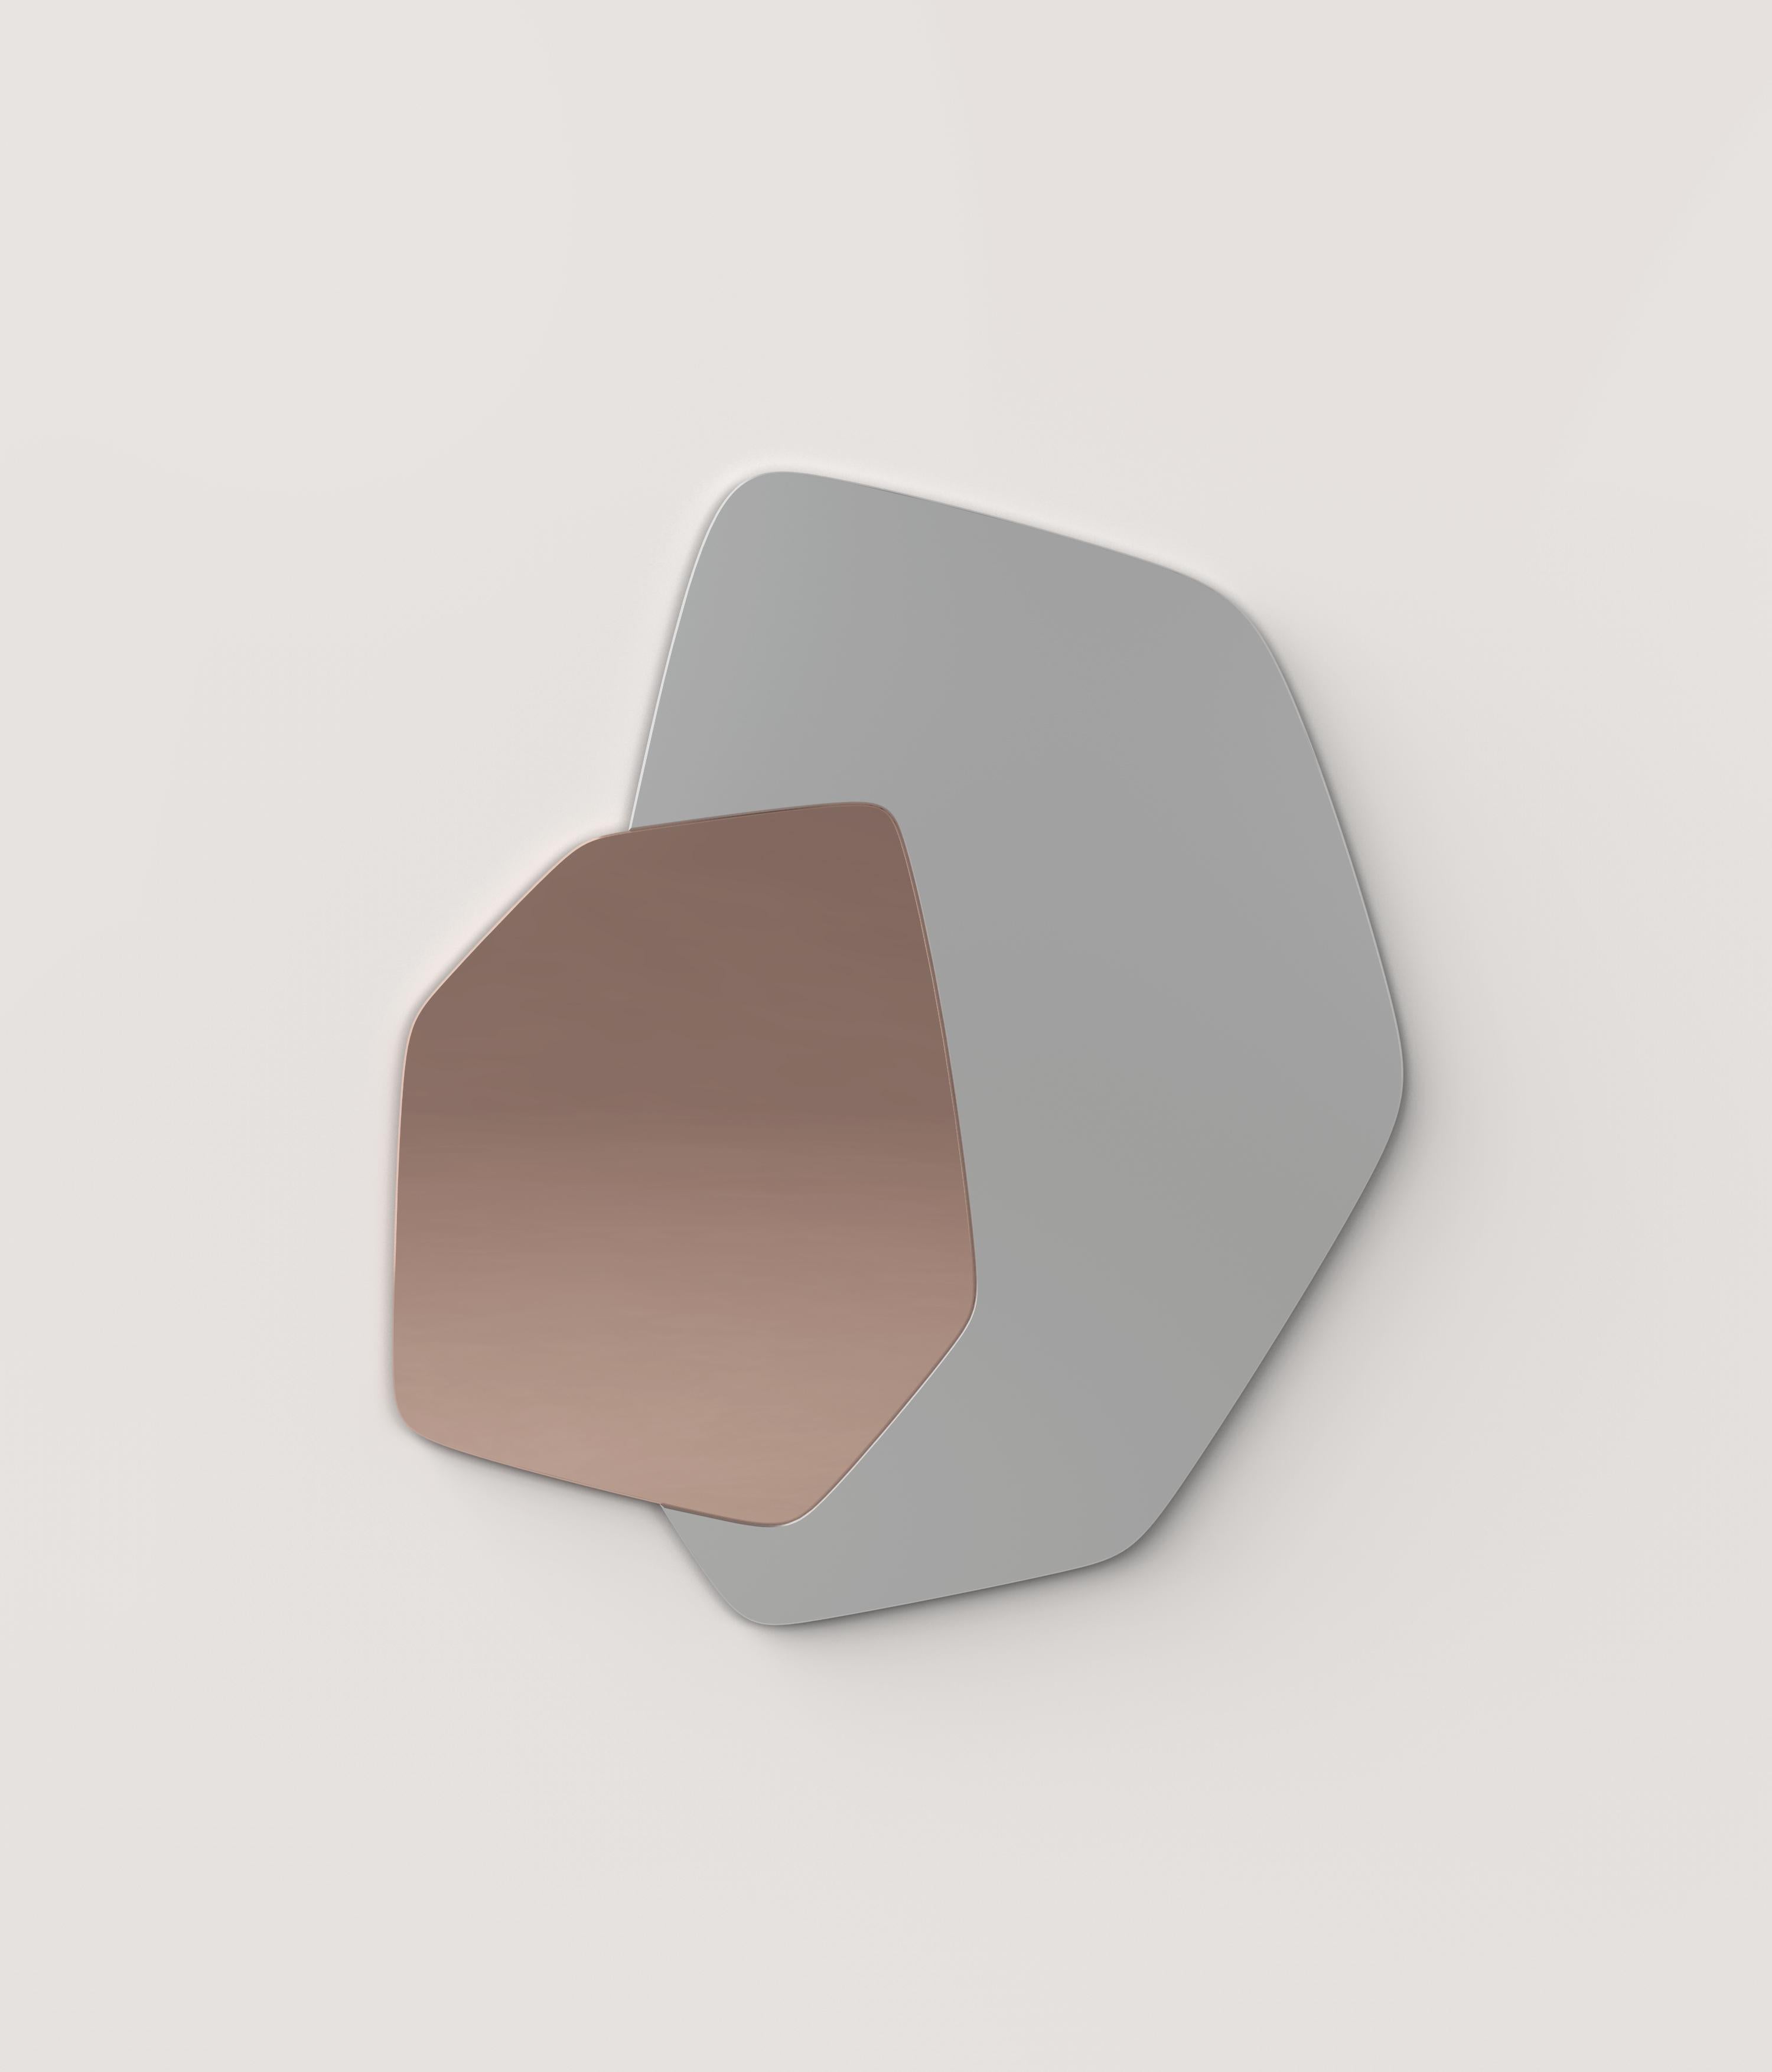 Nori V1 wall mirror by Edizione Limitata
Limited Edition of 1000 pieces. Signed and numbered.
Dimensions: D70 x W0.5 x H79.5 cm
Materials: Classic Finish Mirror+ Copper Finish Mirror
Also available in different colours and dimensions.

Nori is a